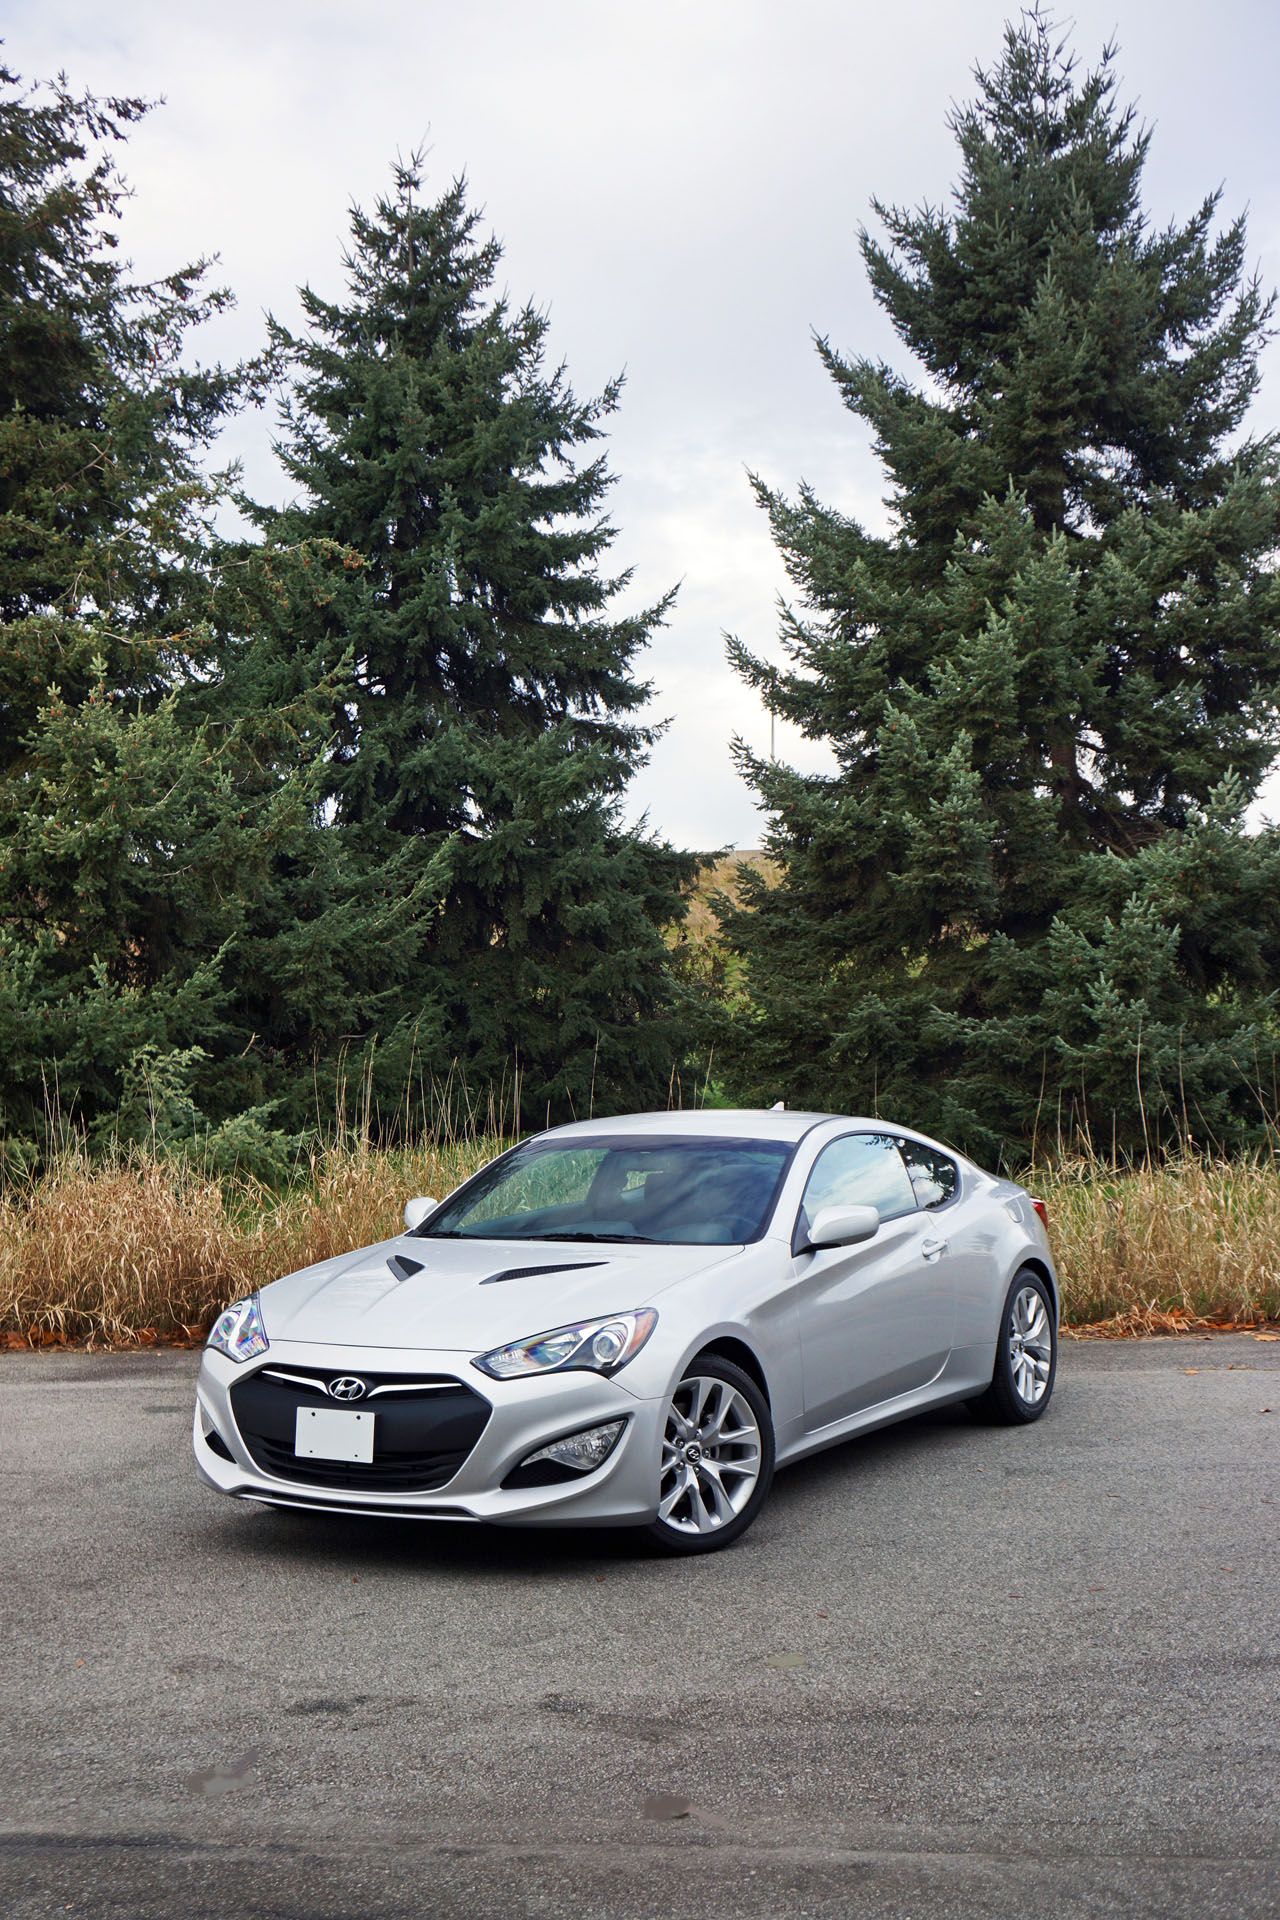 2014 Hyundai Genesis Coupe 2 0t Road Test Review Carcostcanada